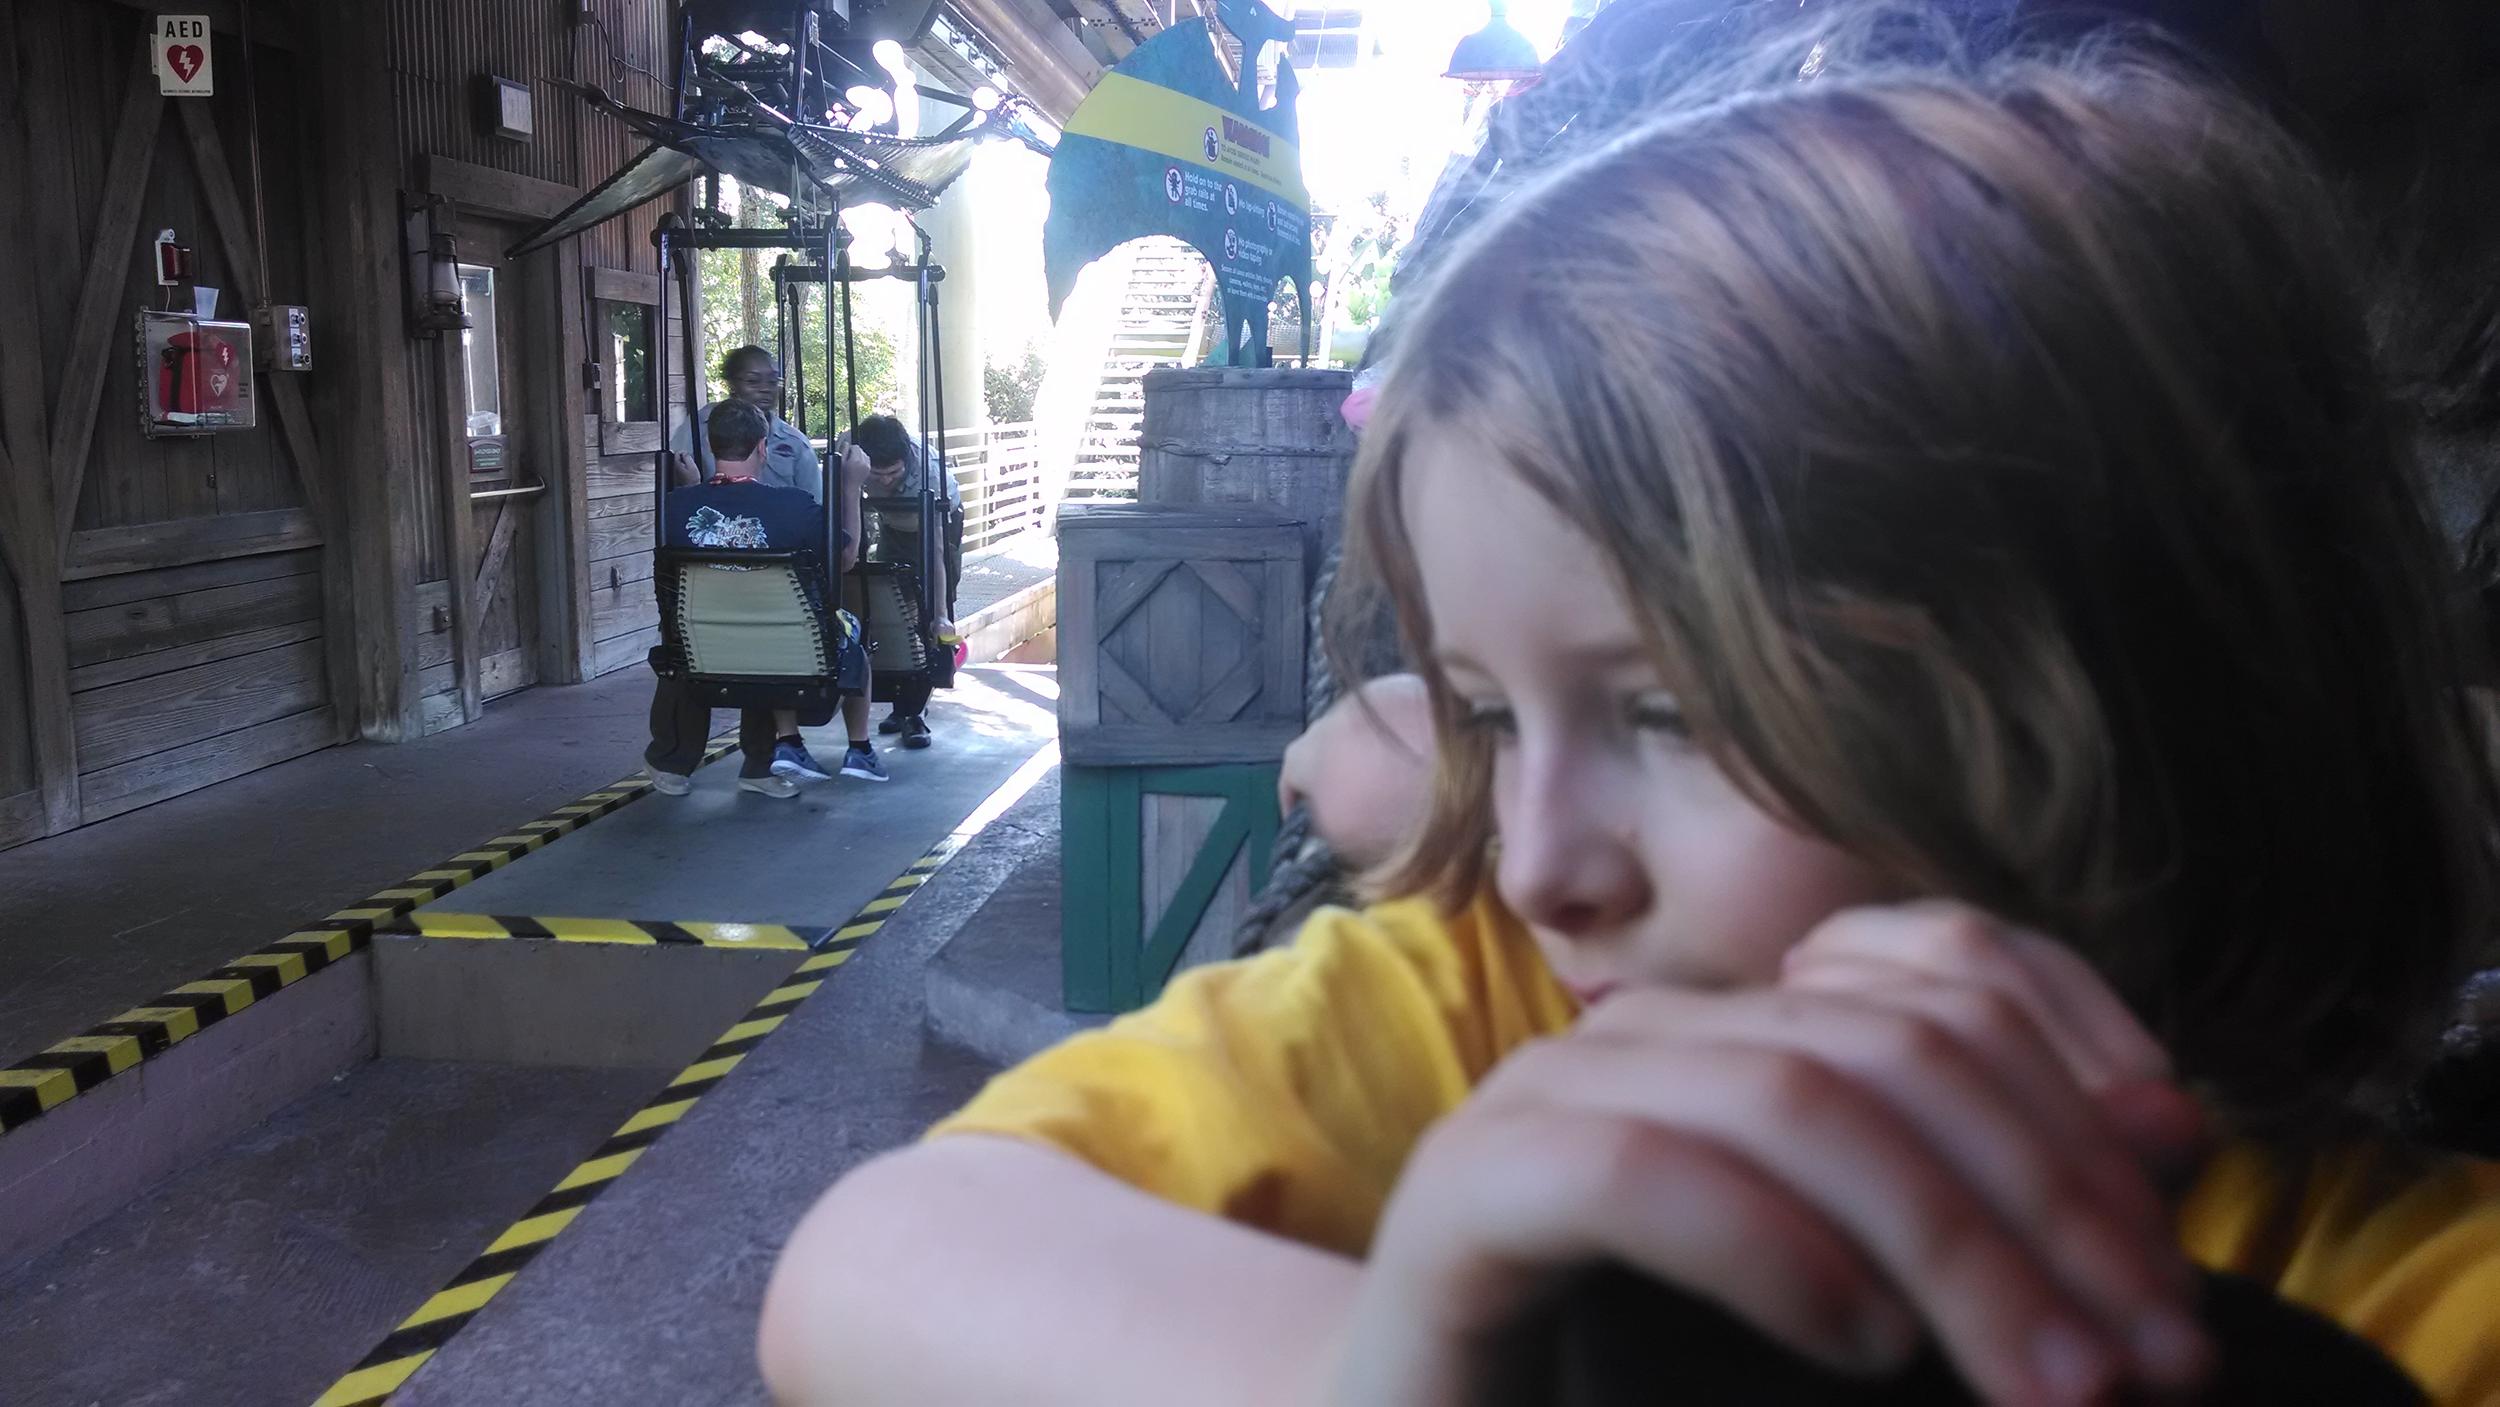 Waiting to ride the Pteradon.